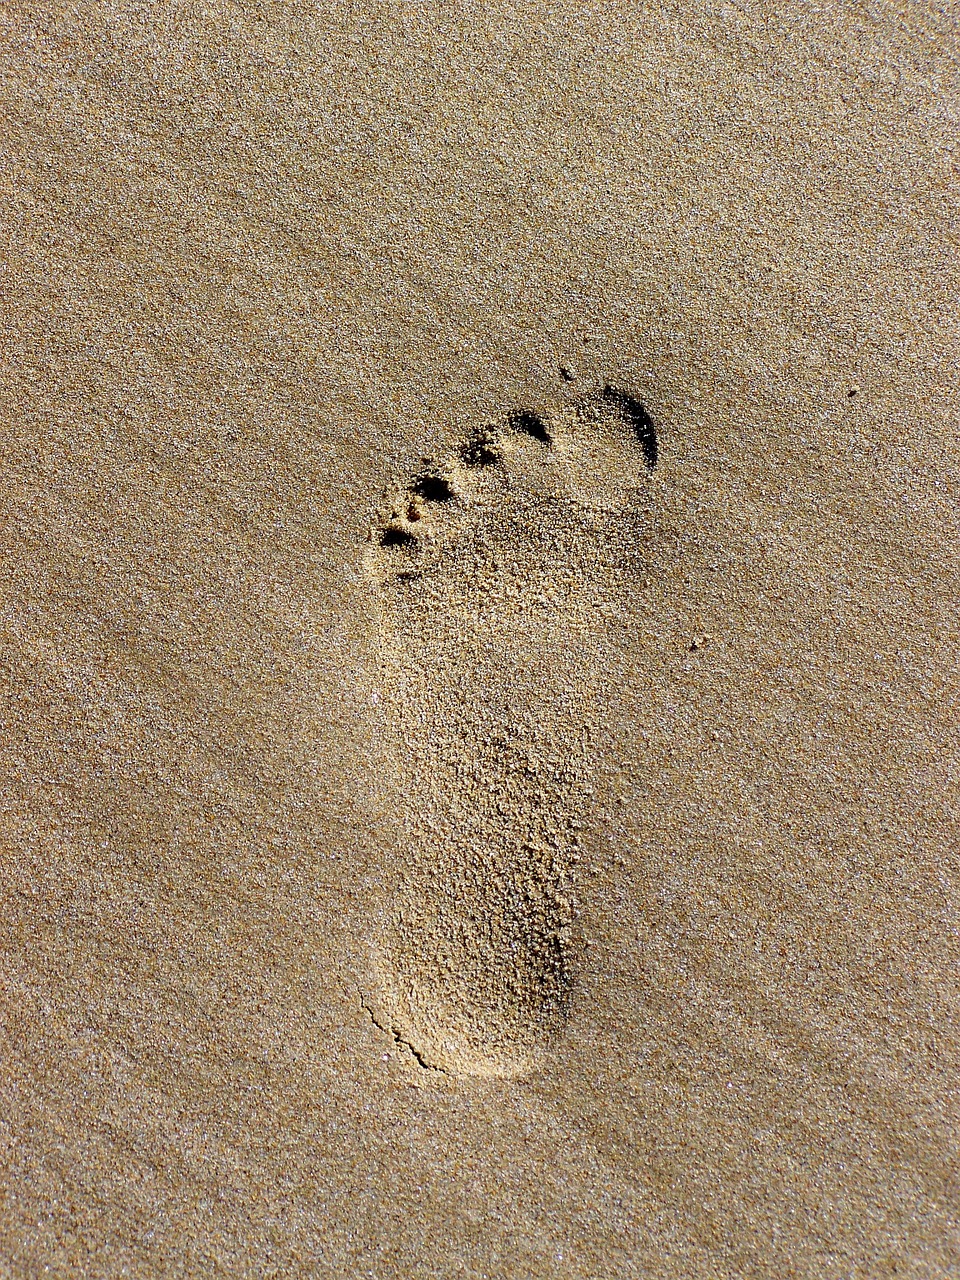 footprint tracks in the sand footprints in the sand free photo